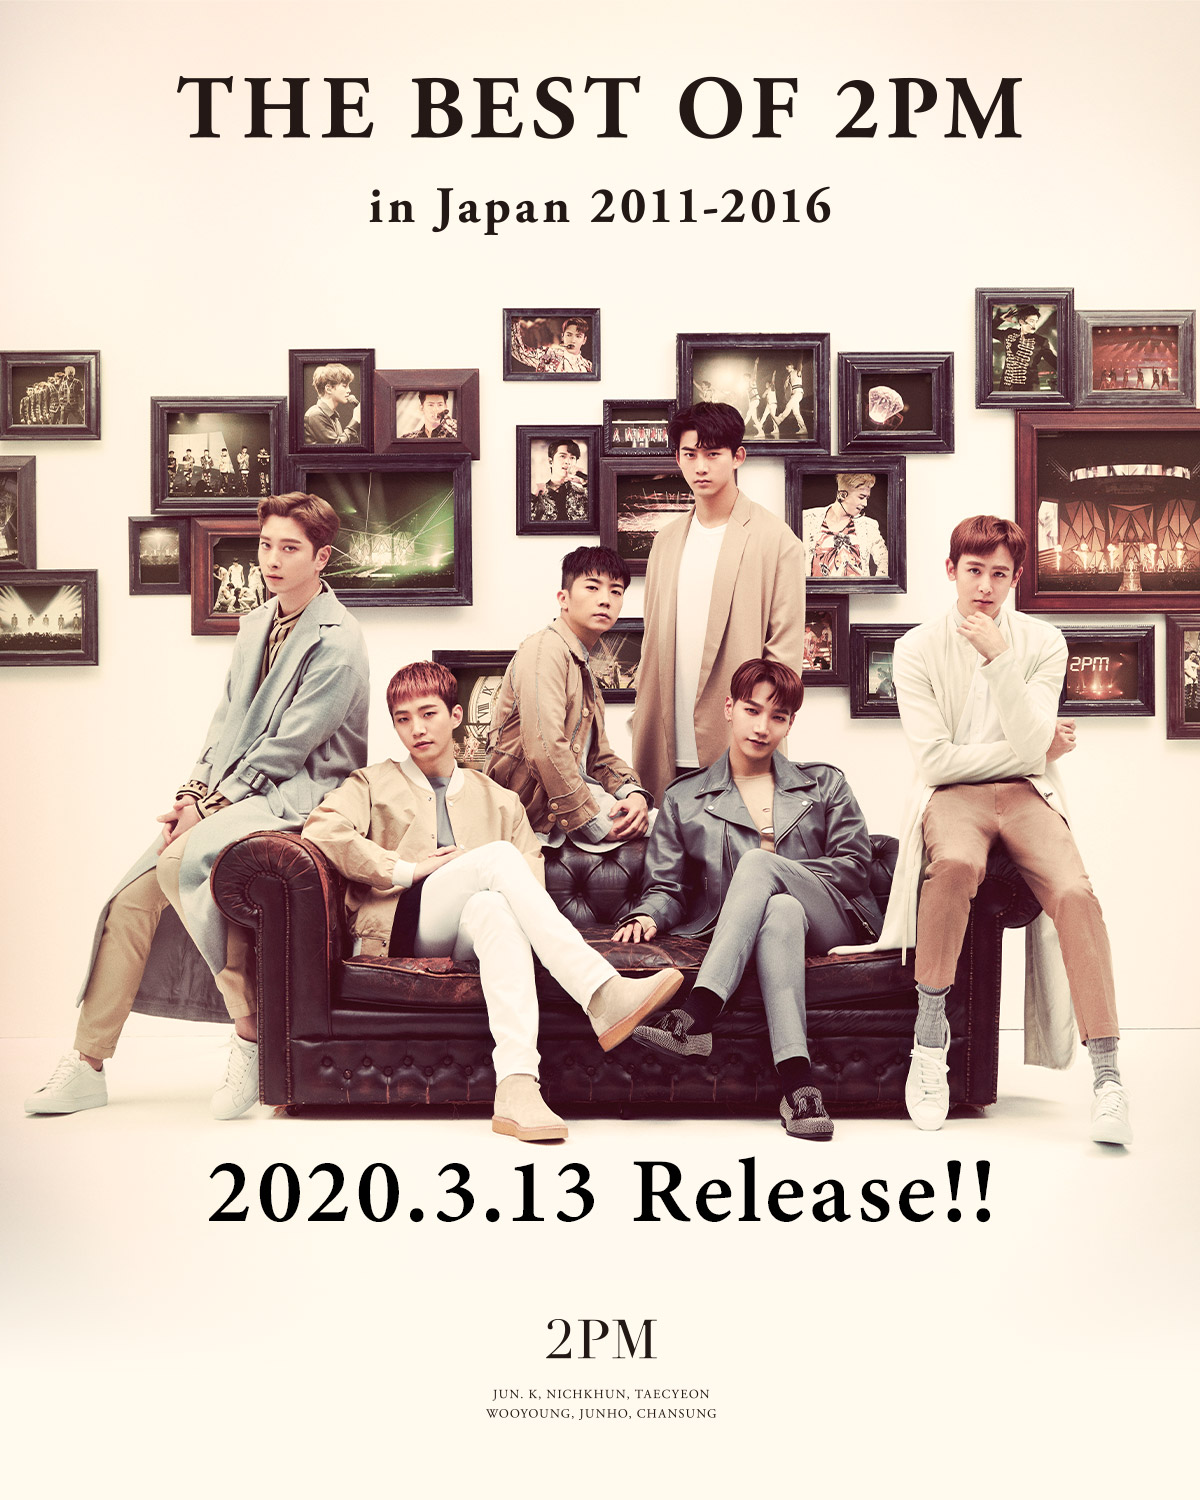 2PM『THE BEST OF 2PM in Japan 2011-2016』2020.3.13 Release!!